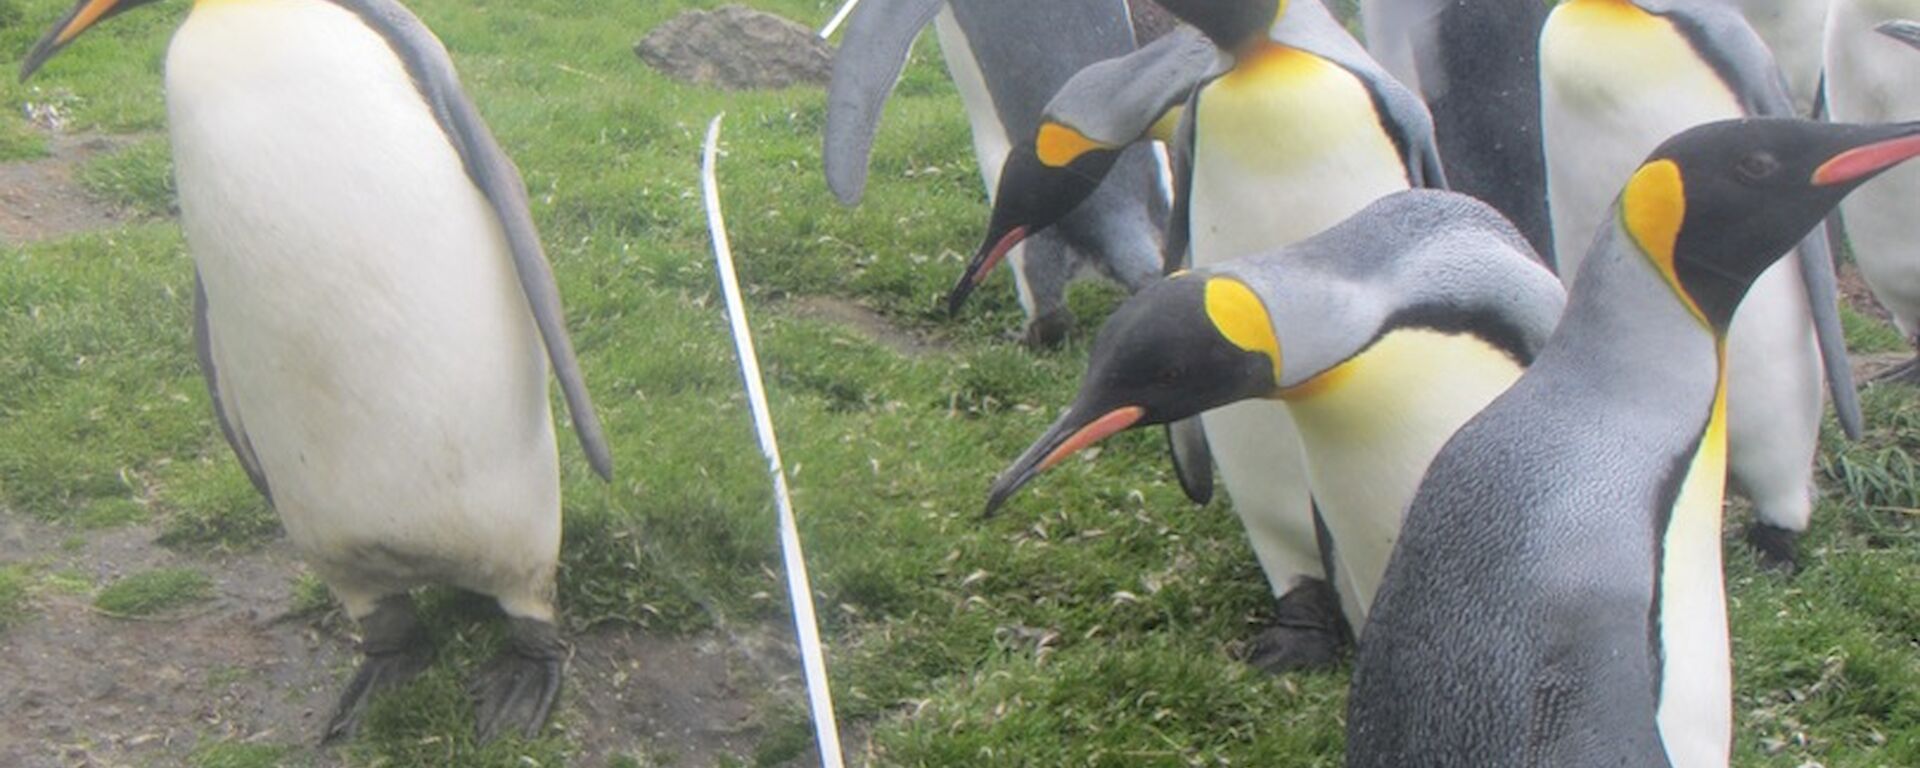 Several king penguins inspecting the survey method — a grid made up of a orange plastic tube frame with string stretched across the frame at regular intervals. There is also a white tape stretched across the slope. Hurd Point hut can be seen in the distant background